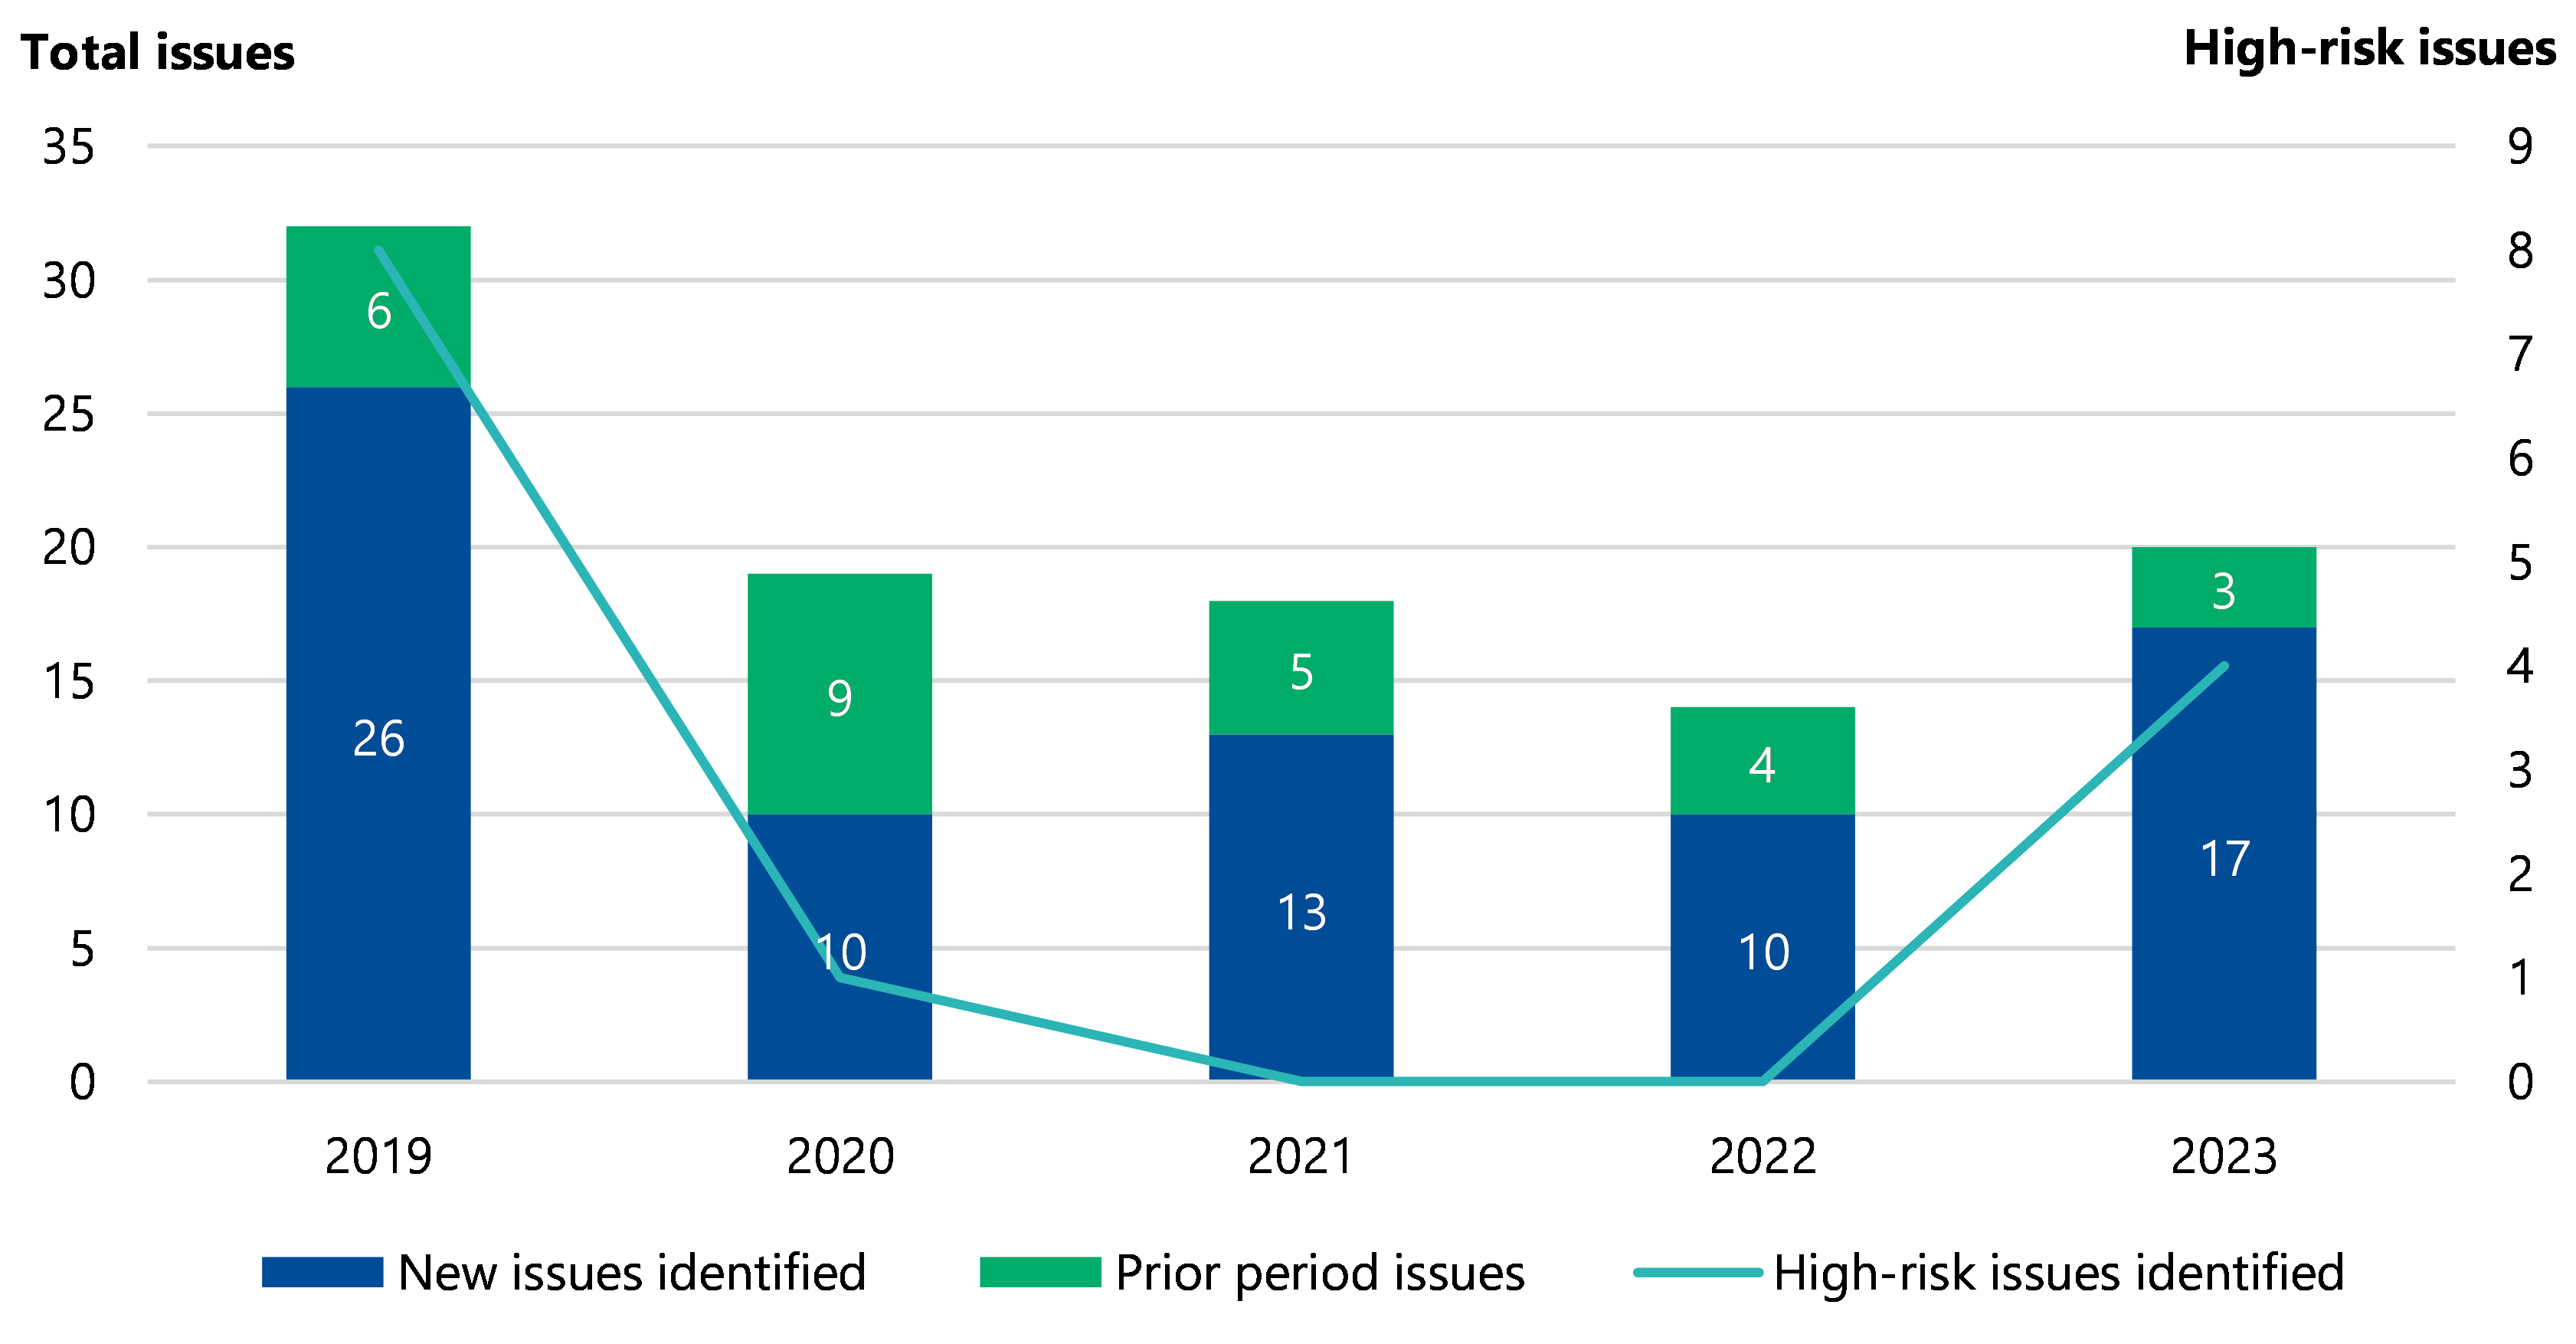 Figure 14 is a stacked bar and line graph that shows in 2019 there were 26 new issues identified and 6 prior period issues; in 2020 there were 10 new issues identified and 9 prior period issues; in 2021 there were 13 new issues identified and 5 prior period issues; in 2022 there were 10 new issues identified and 4 prior period issues; and in 2023 there were 17 new issues identified and 3 prior period issues. There were approximately 8 high-risk issues in 2019, 1 in 2020, 0 in 2021 and 2022, and 4 in 2023.